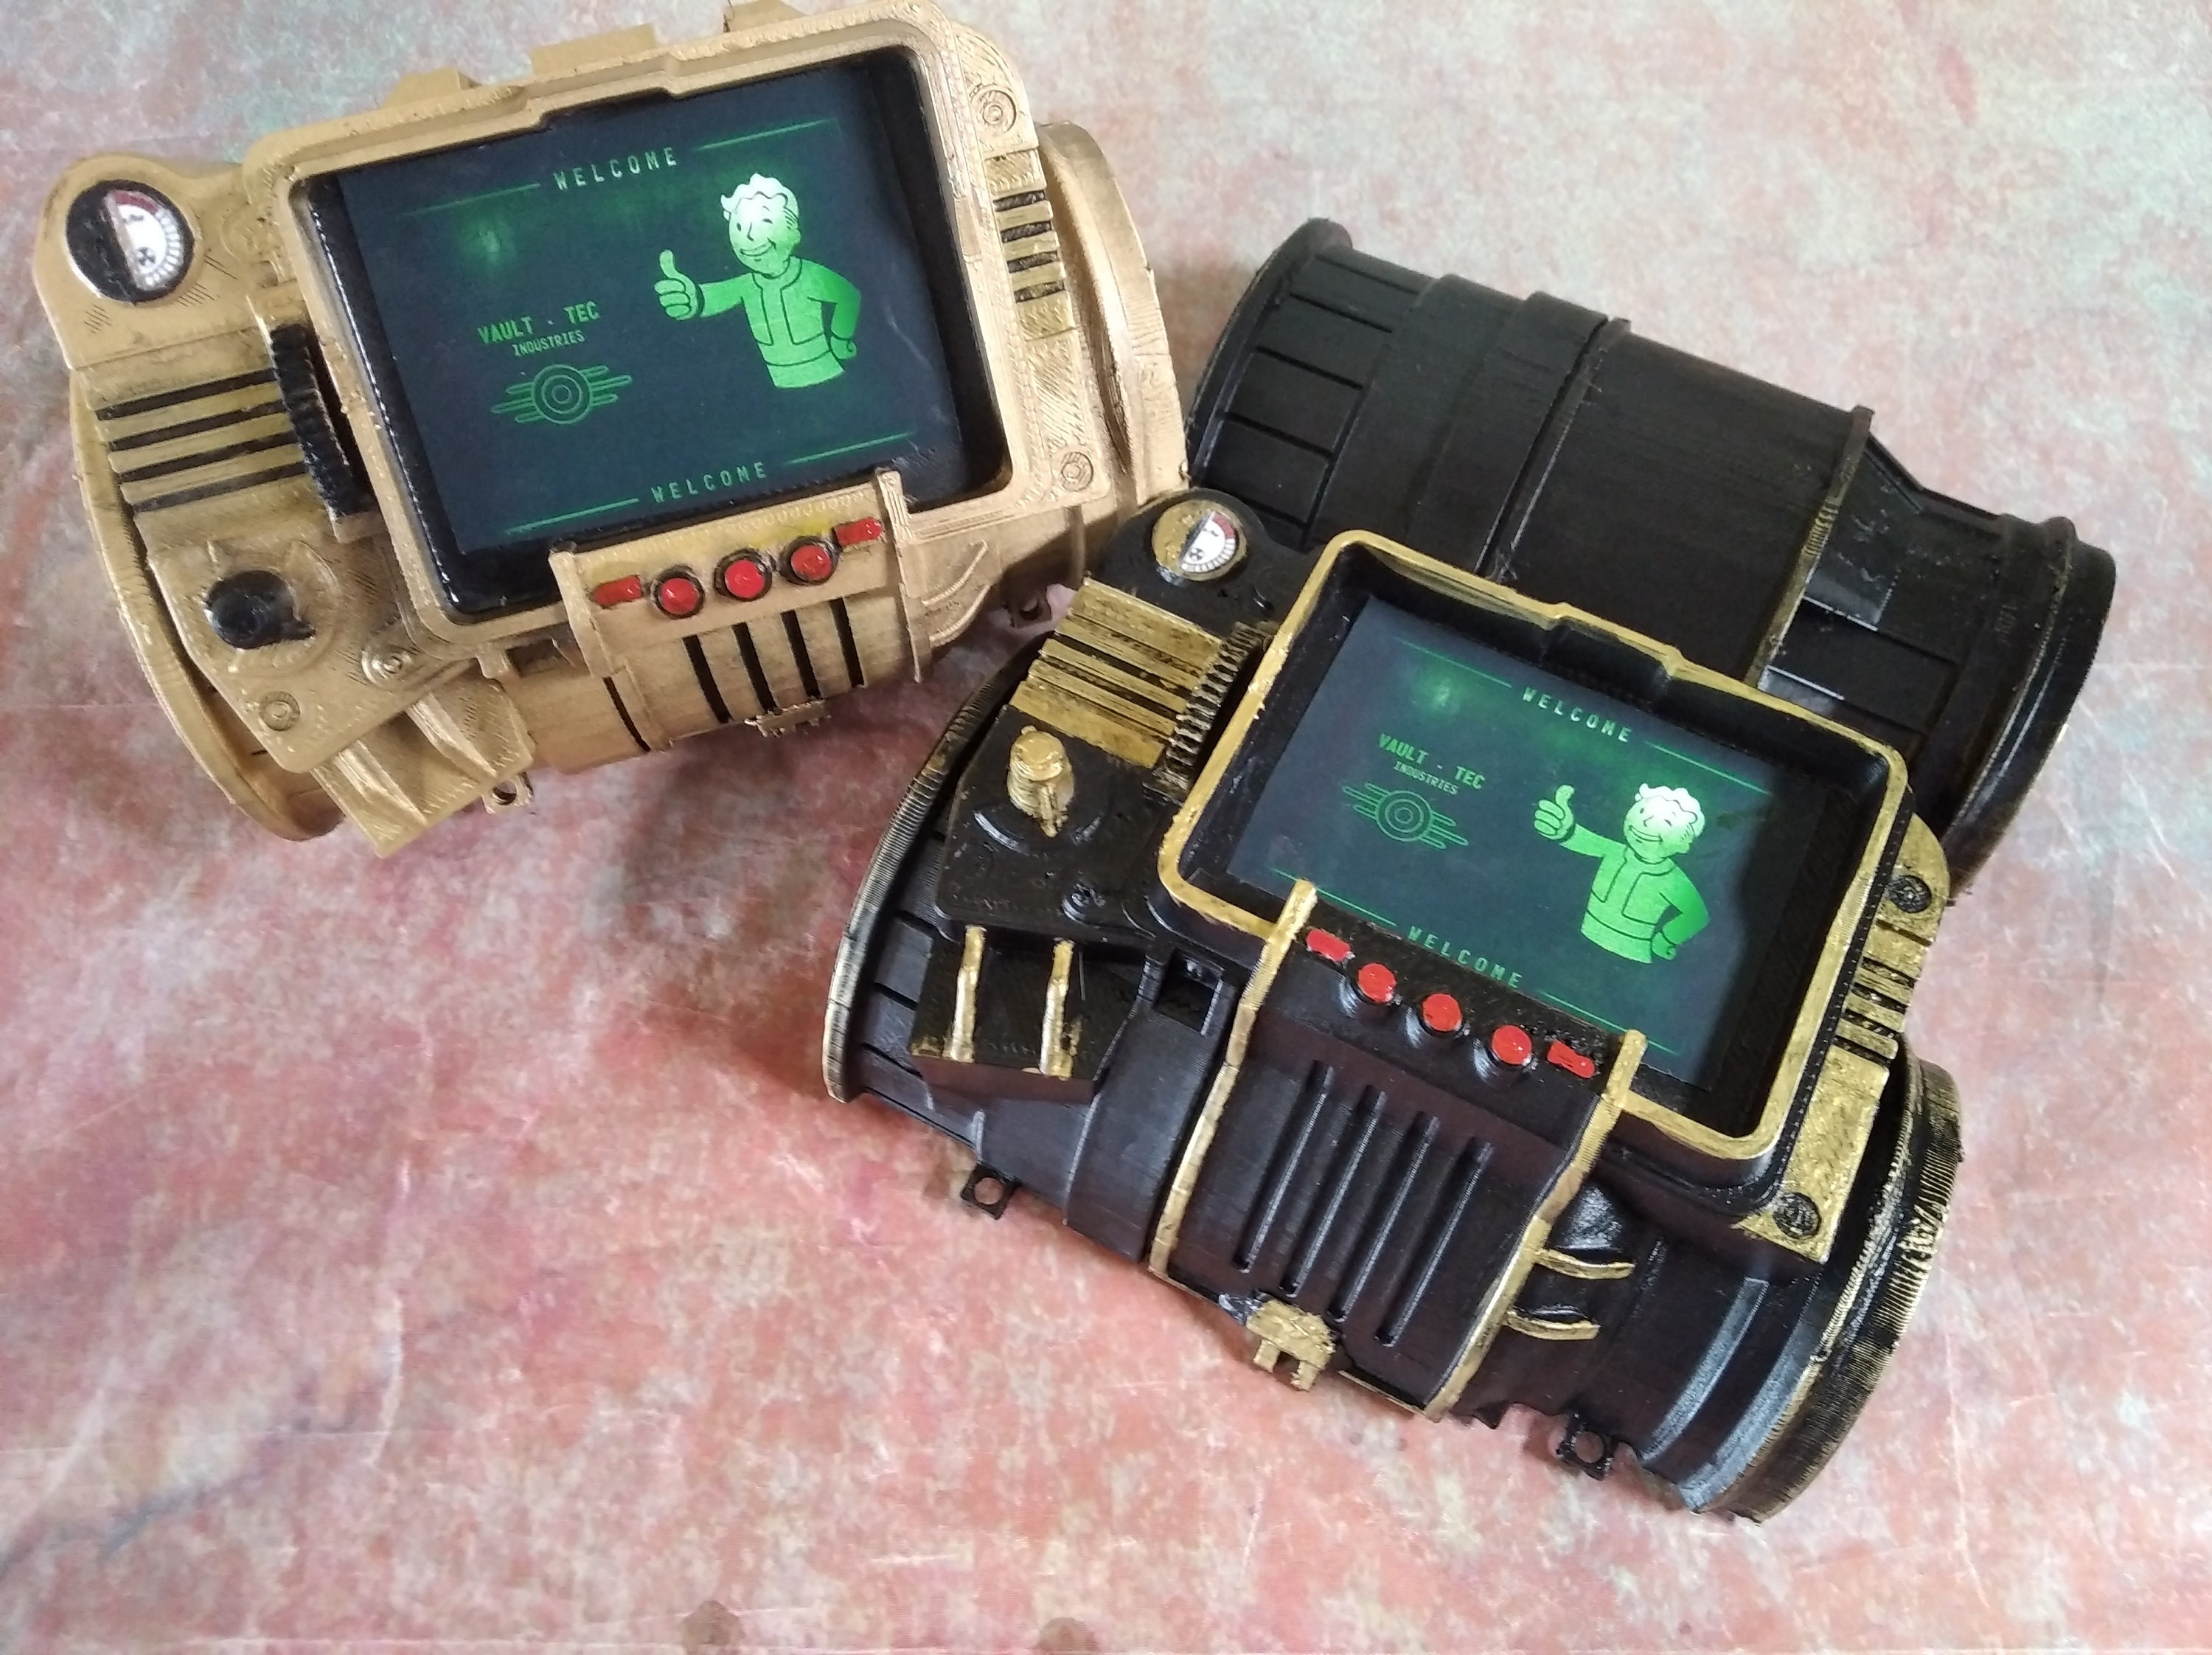 fallout 4 pipboy not working